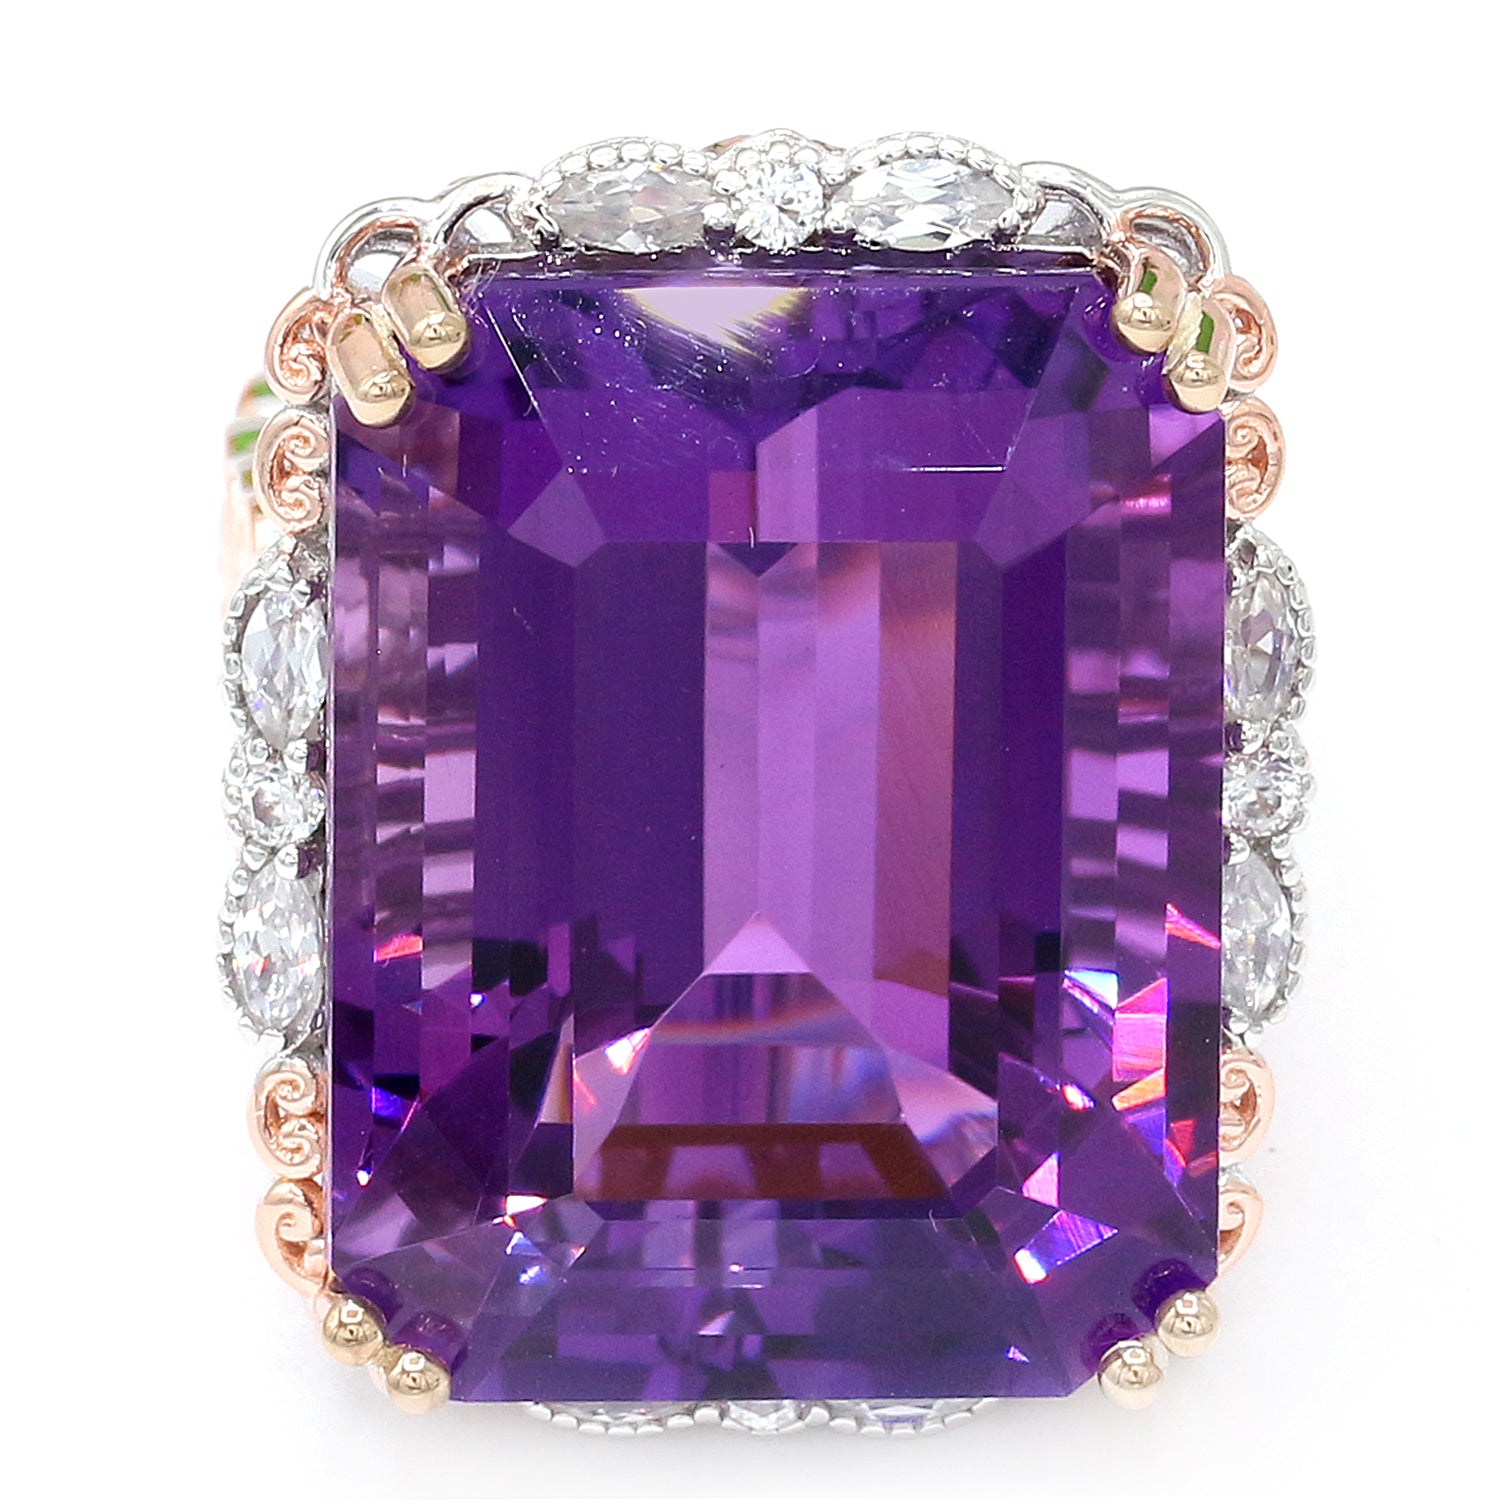 Limited Edition Gems en Vogue One-of-a-Kind 52.36ctw Namibian Amethyst & White Zircon Honker Ring